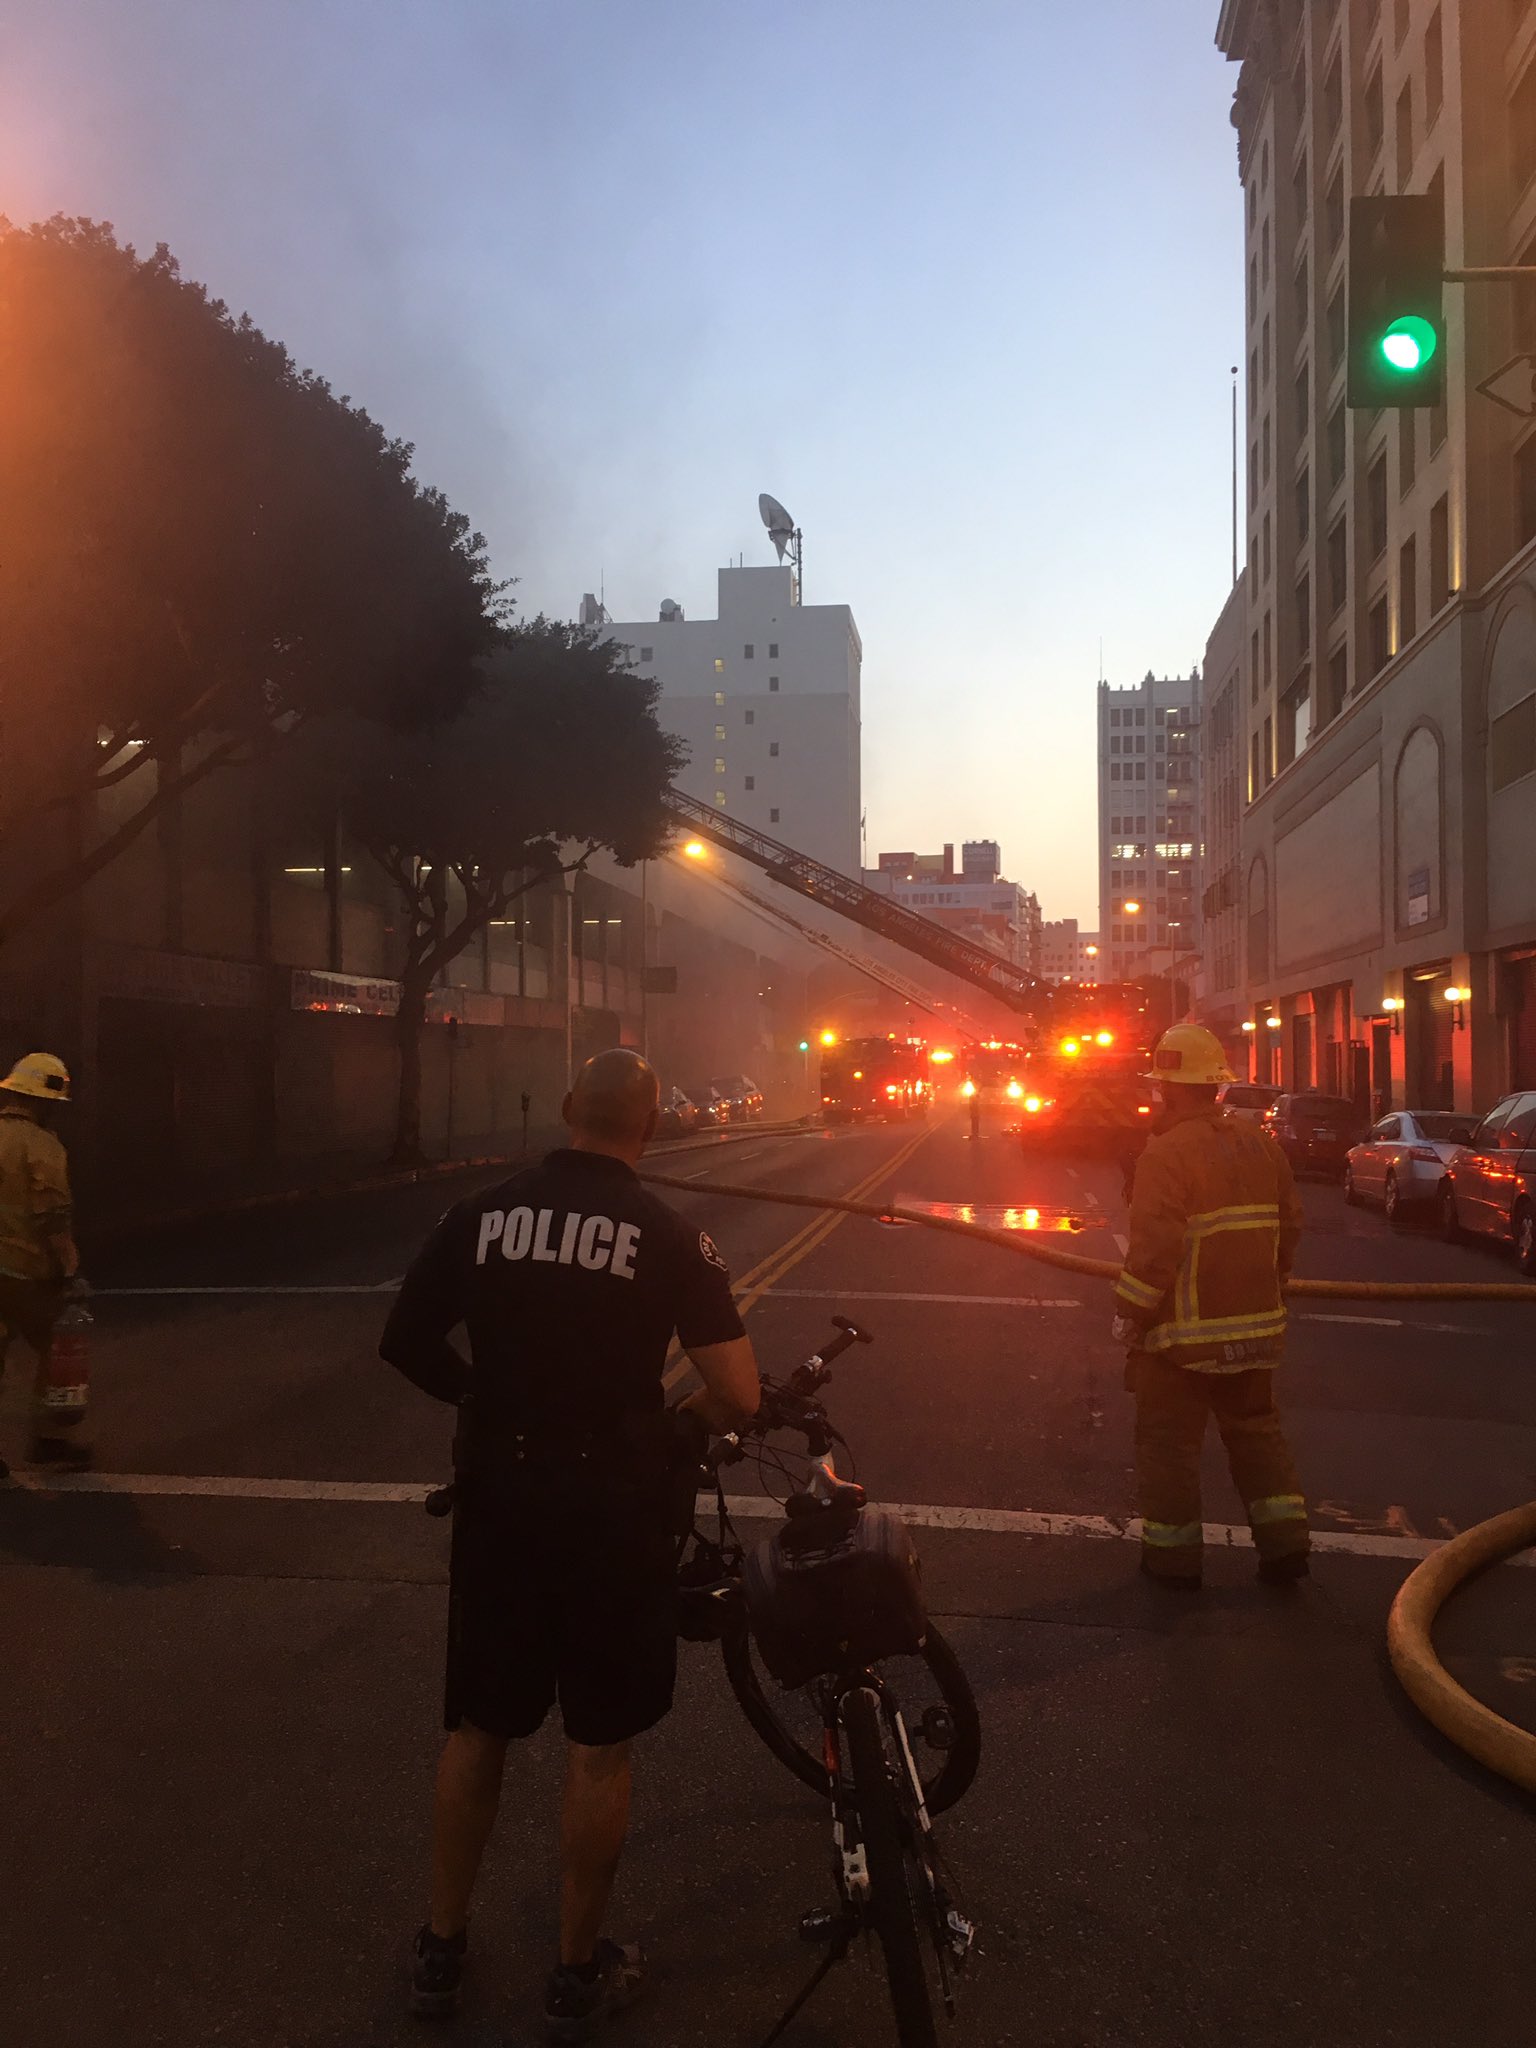 Fire and police seen with building in background, smoke emanating 